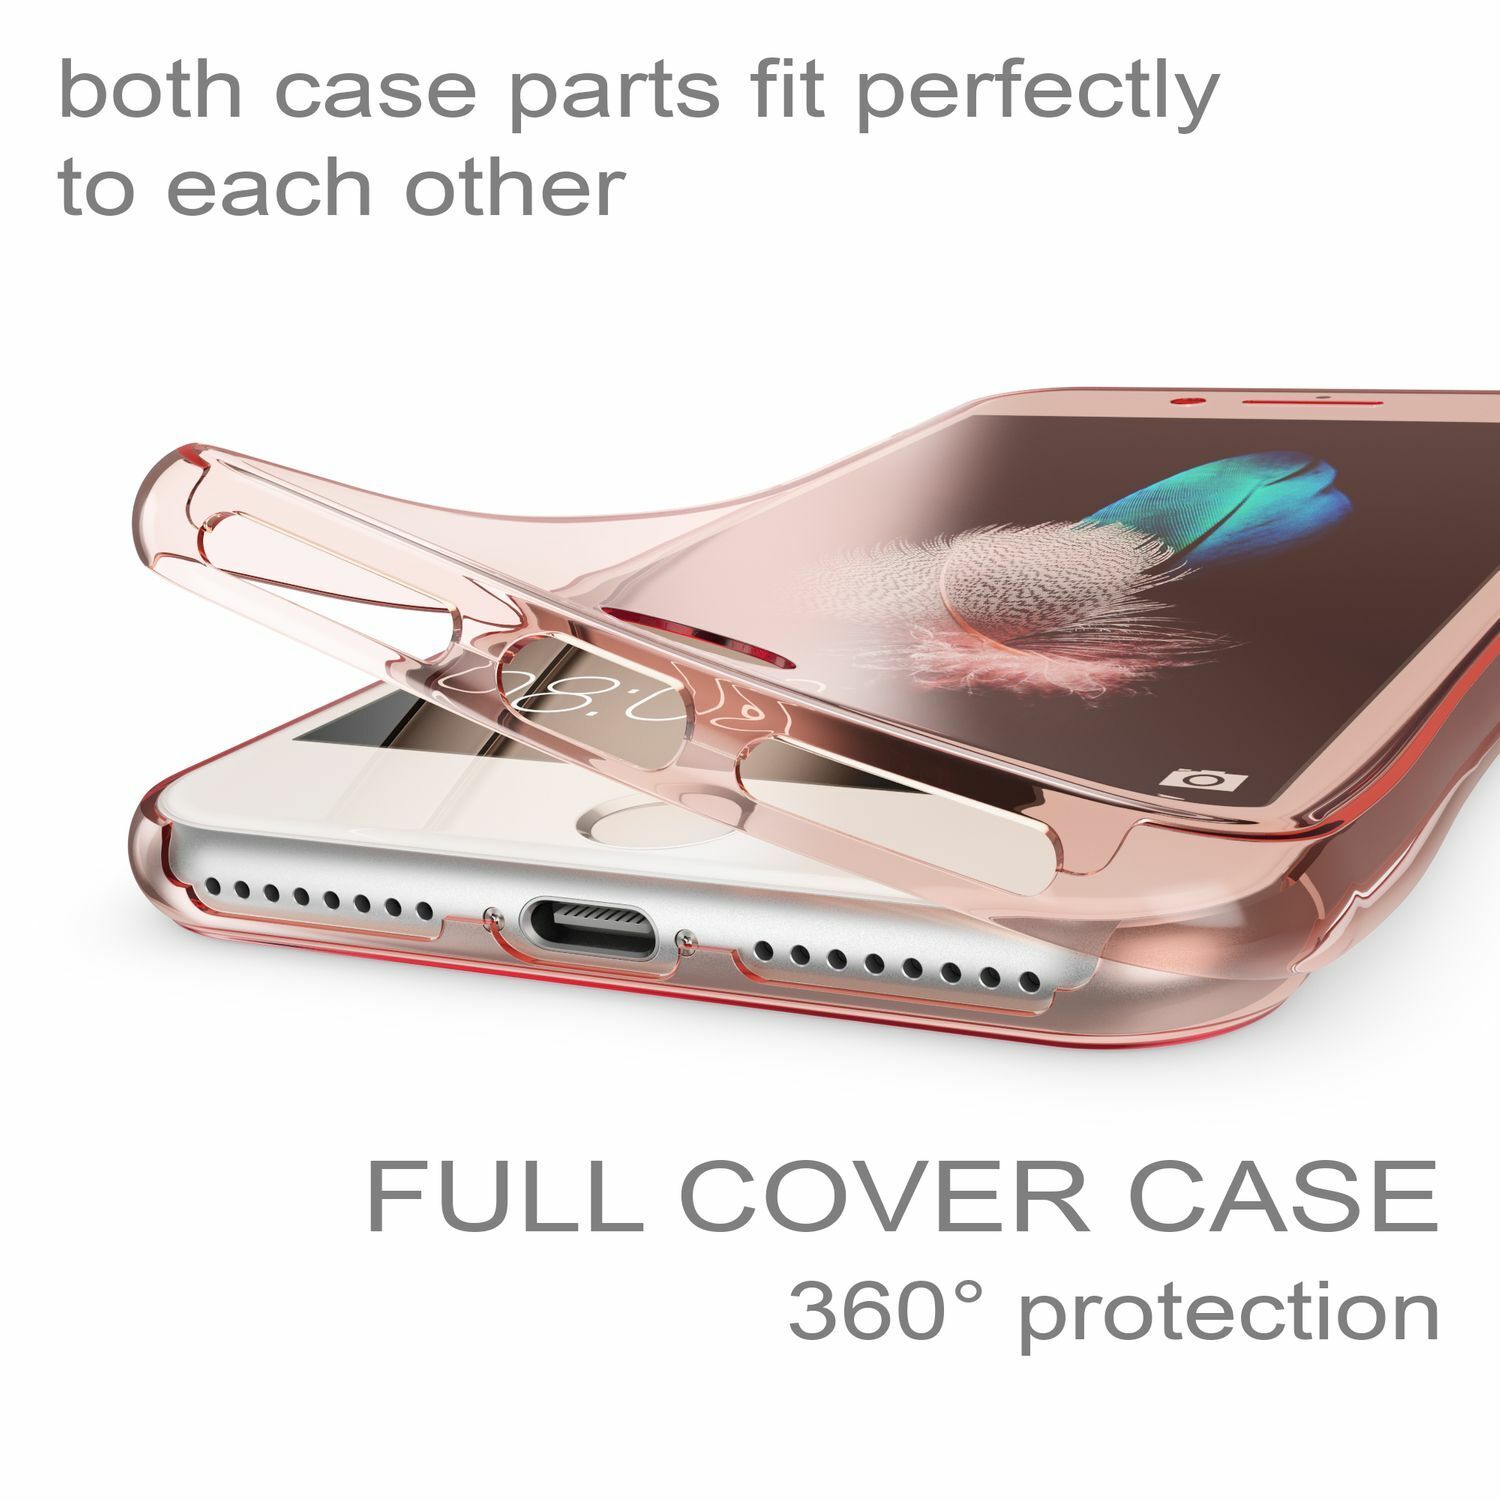 naked swear micro Apple iPhone 7 Plus 8 Plus 360 Full Body Case by NALIA, Front and Back  Cover | eBay